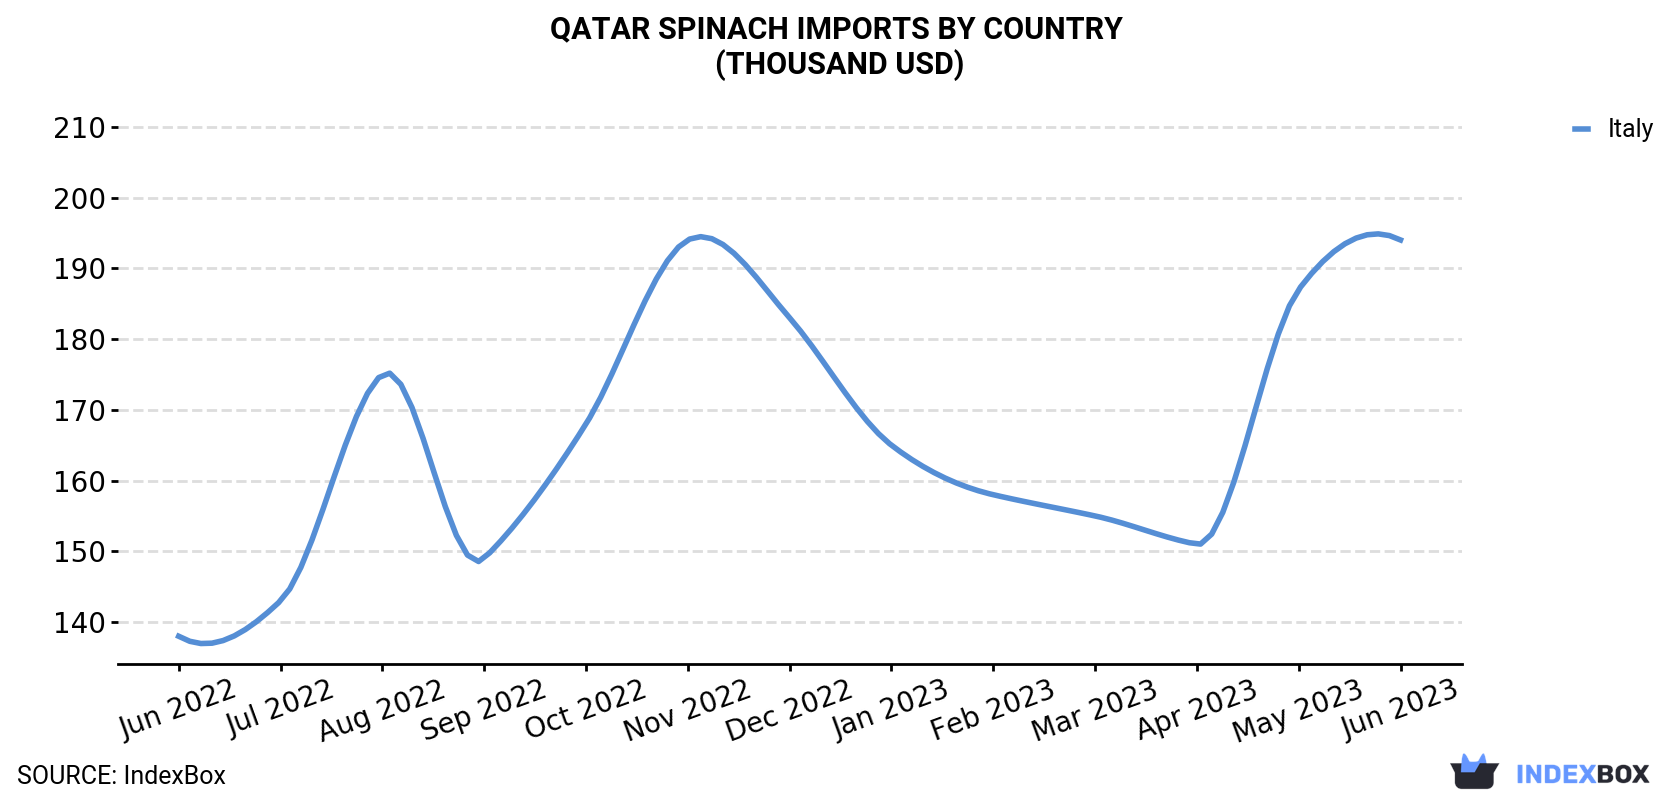 Qatar Spinach Imports By Country (Thousand USD)